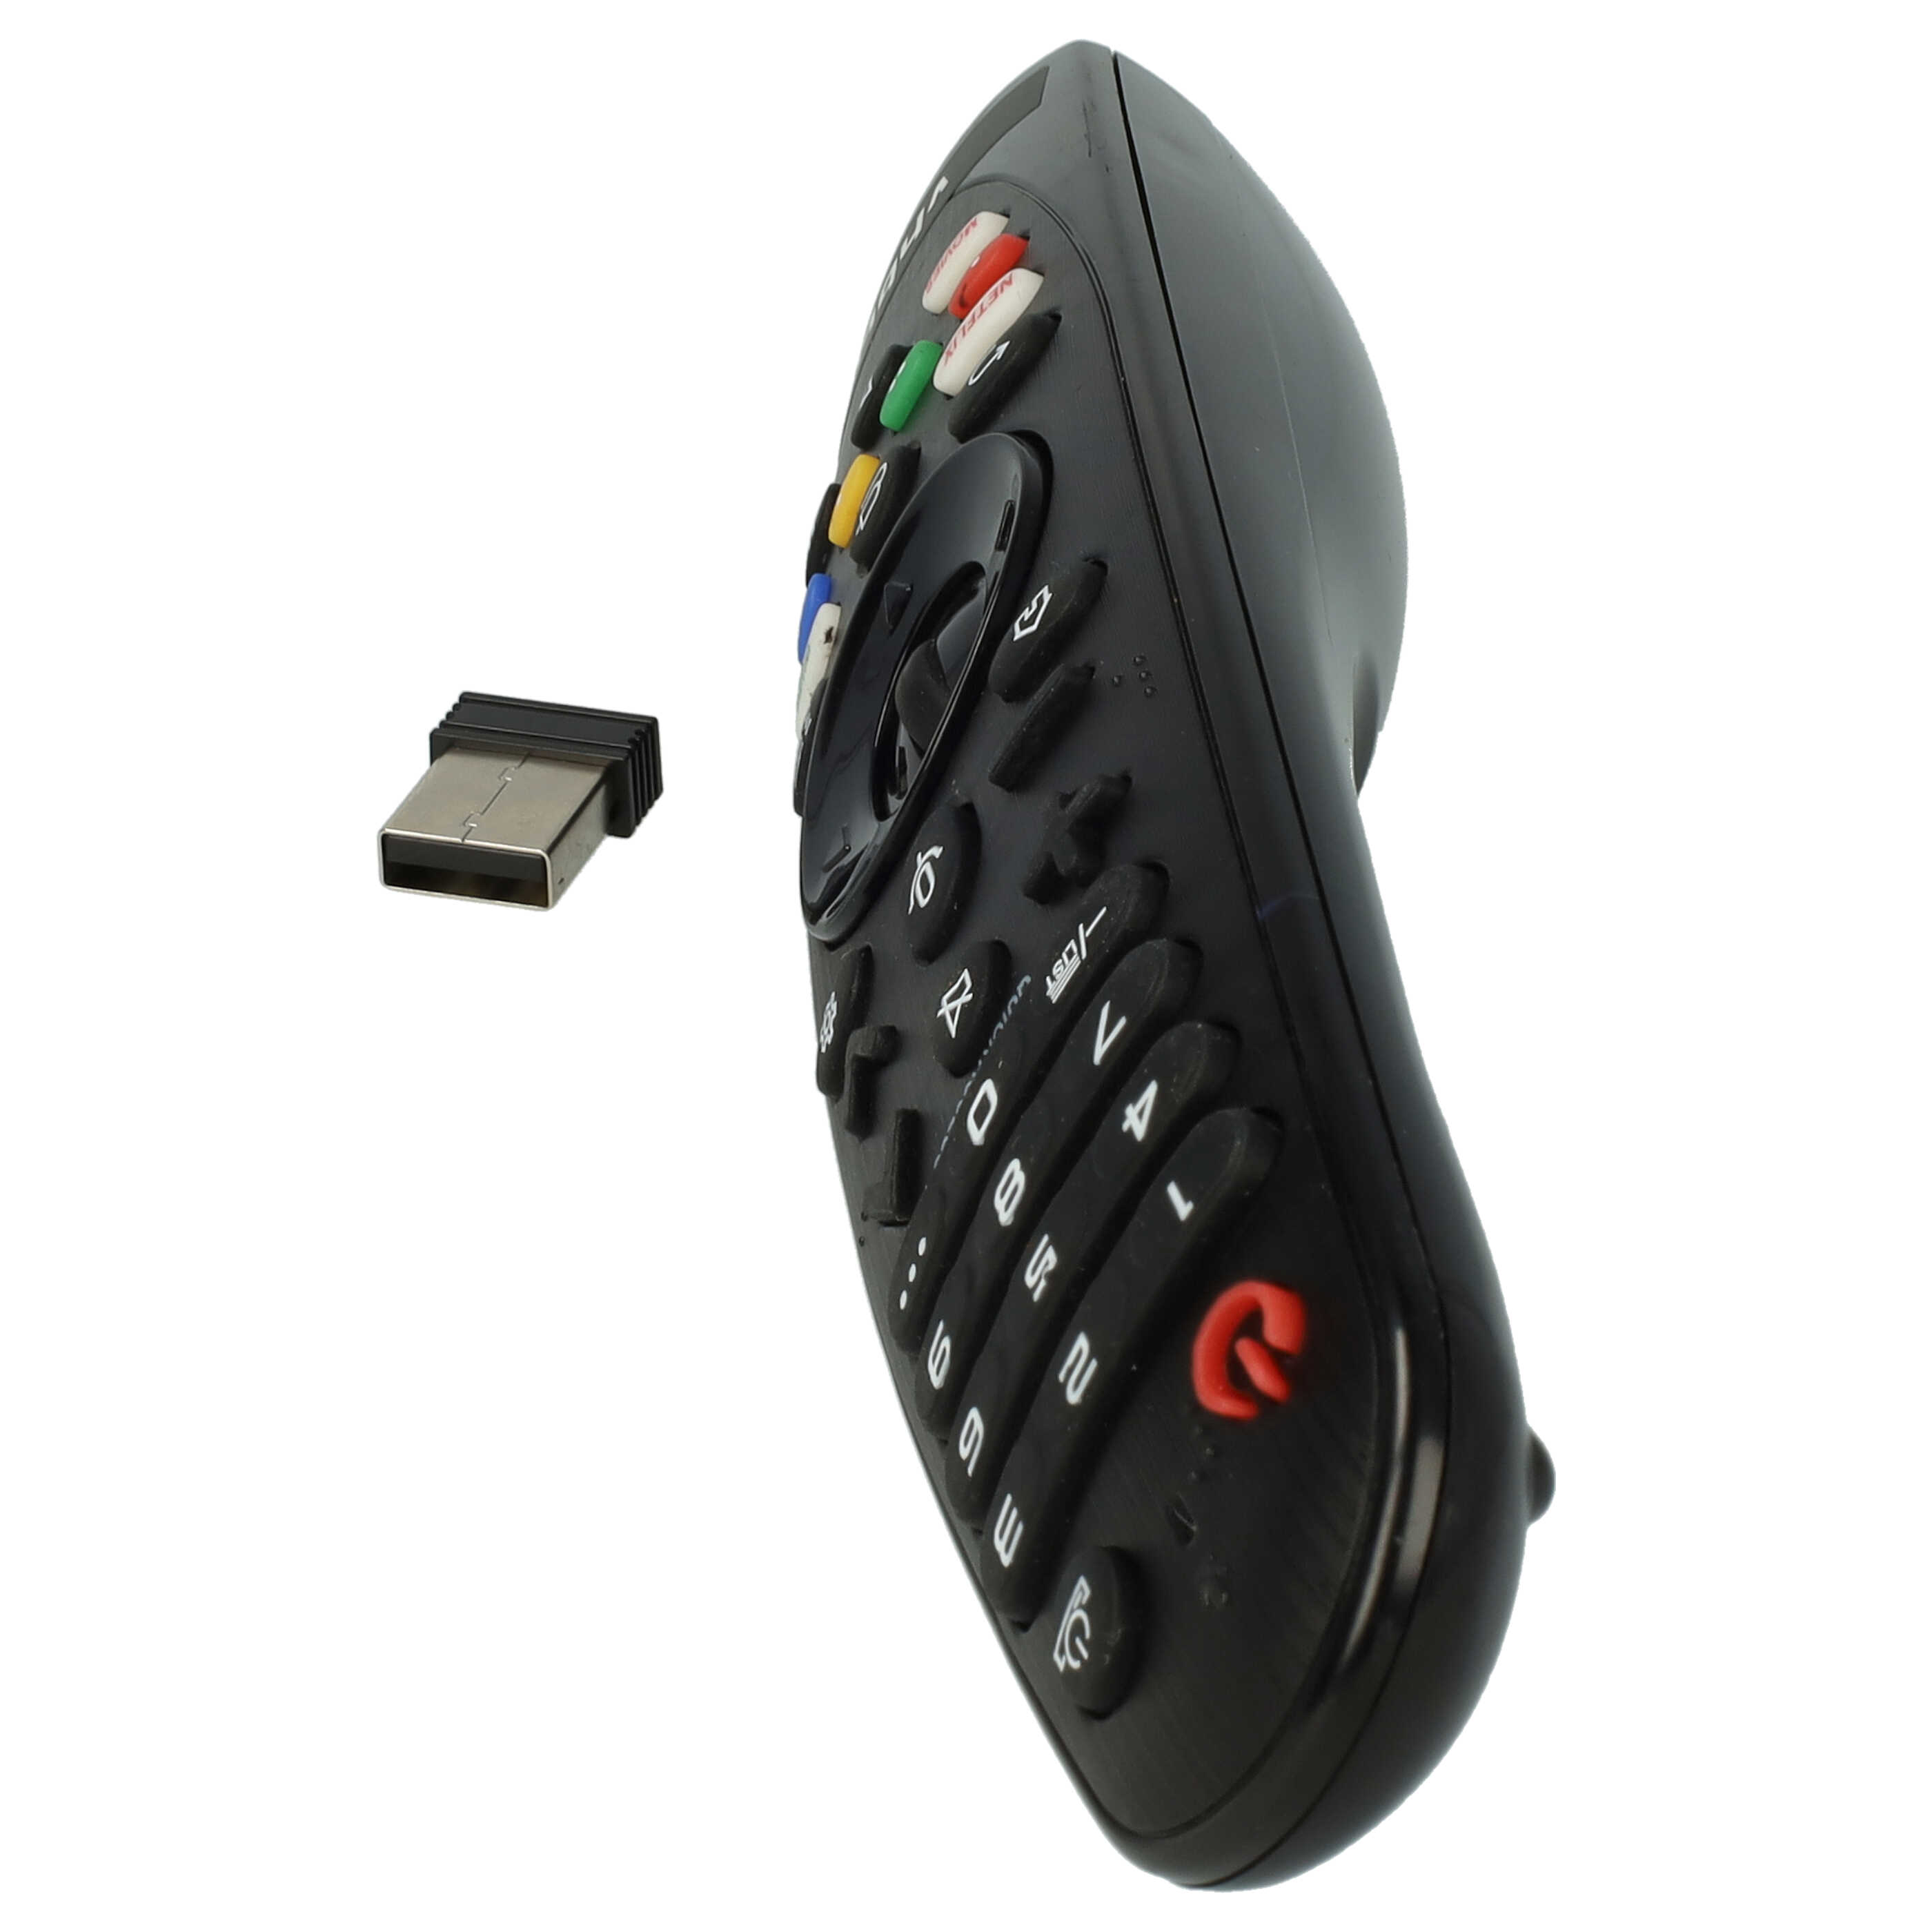 Remote Control replaces LG AN-MR19BA for LG TV